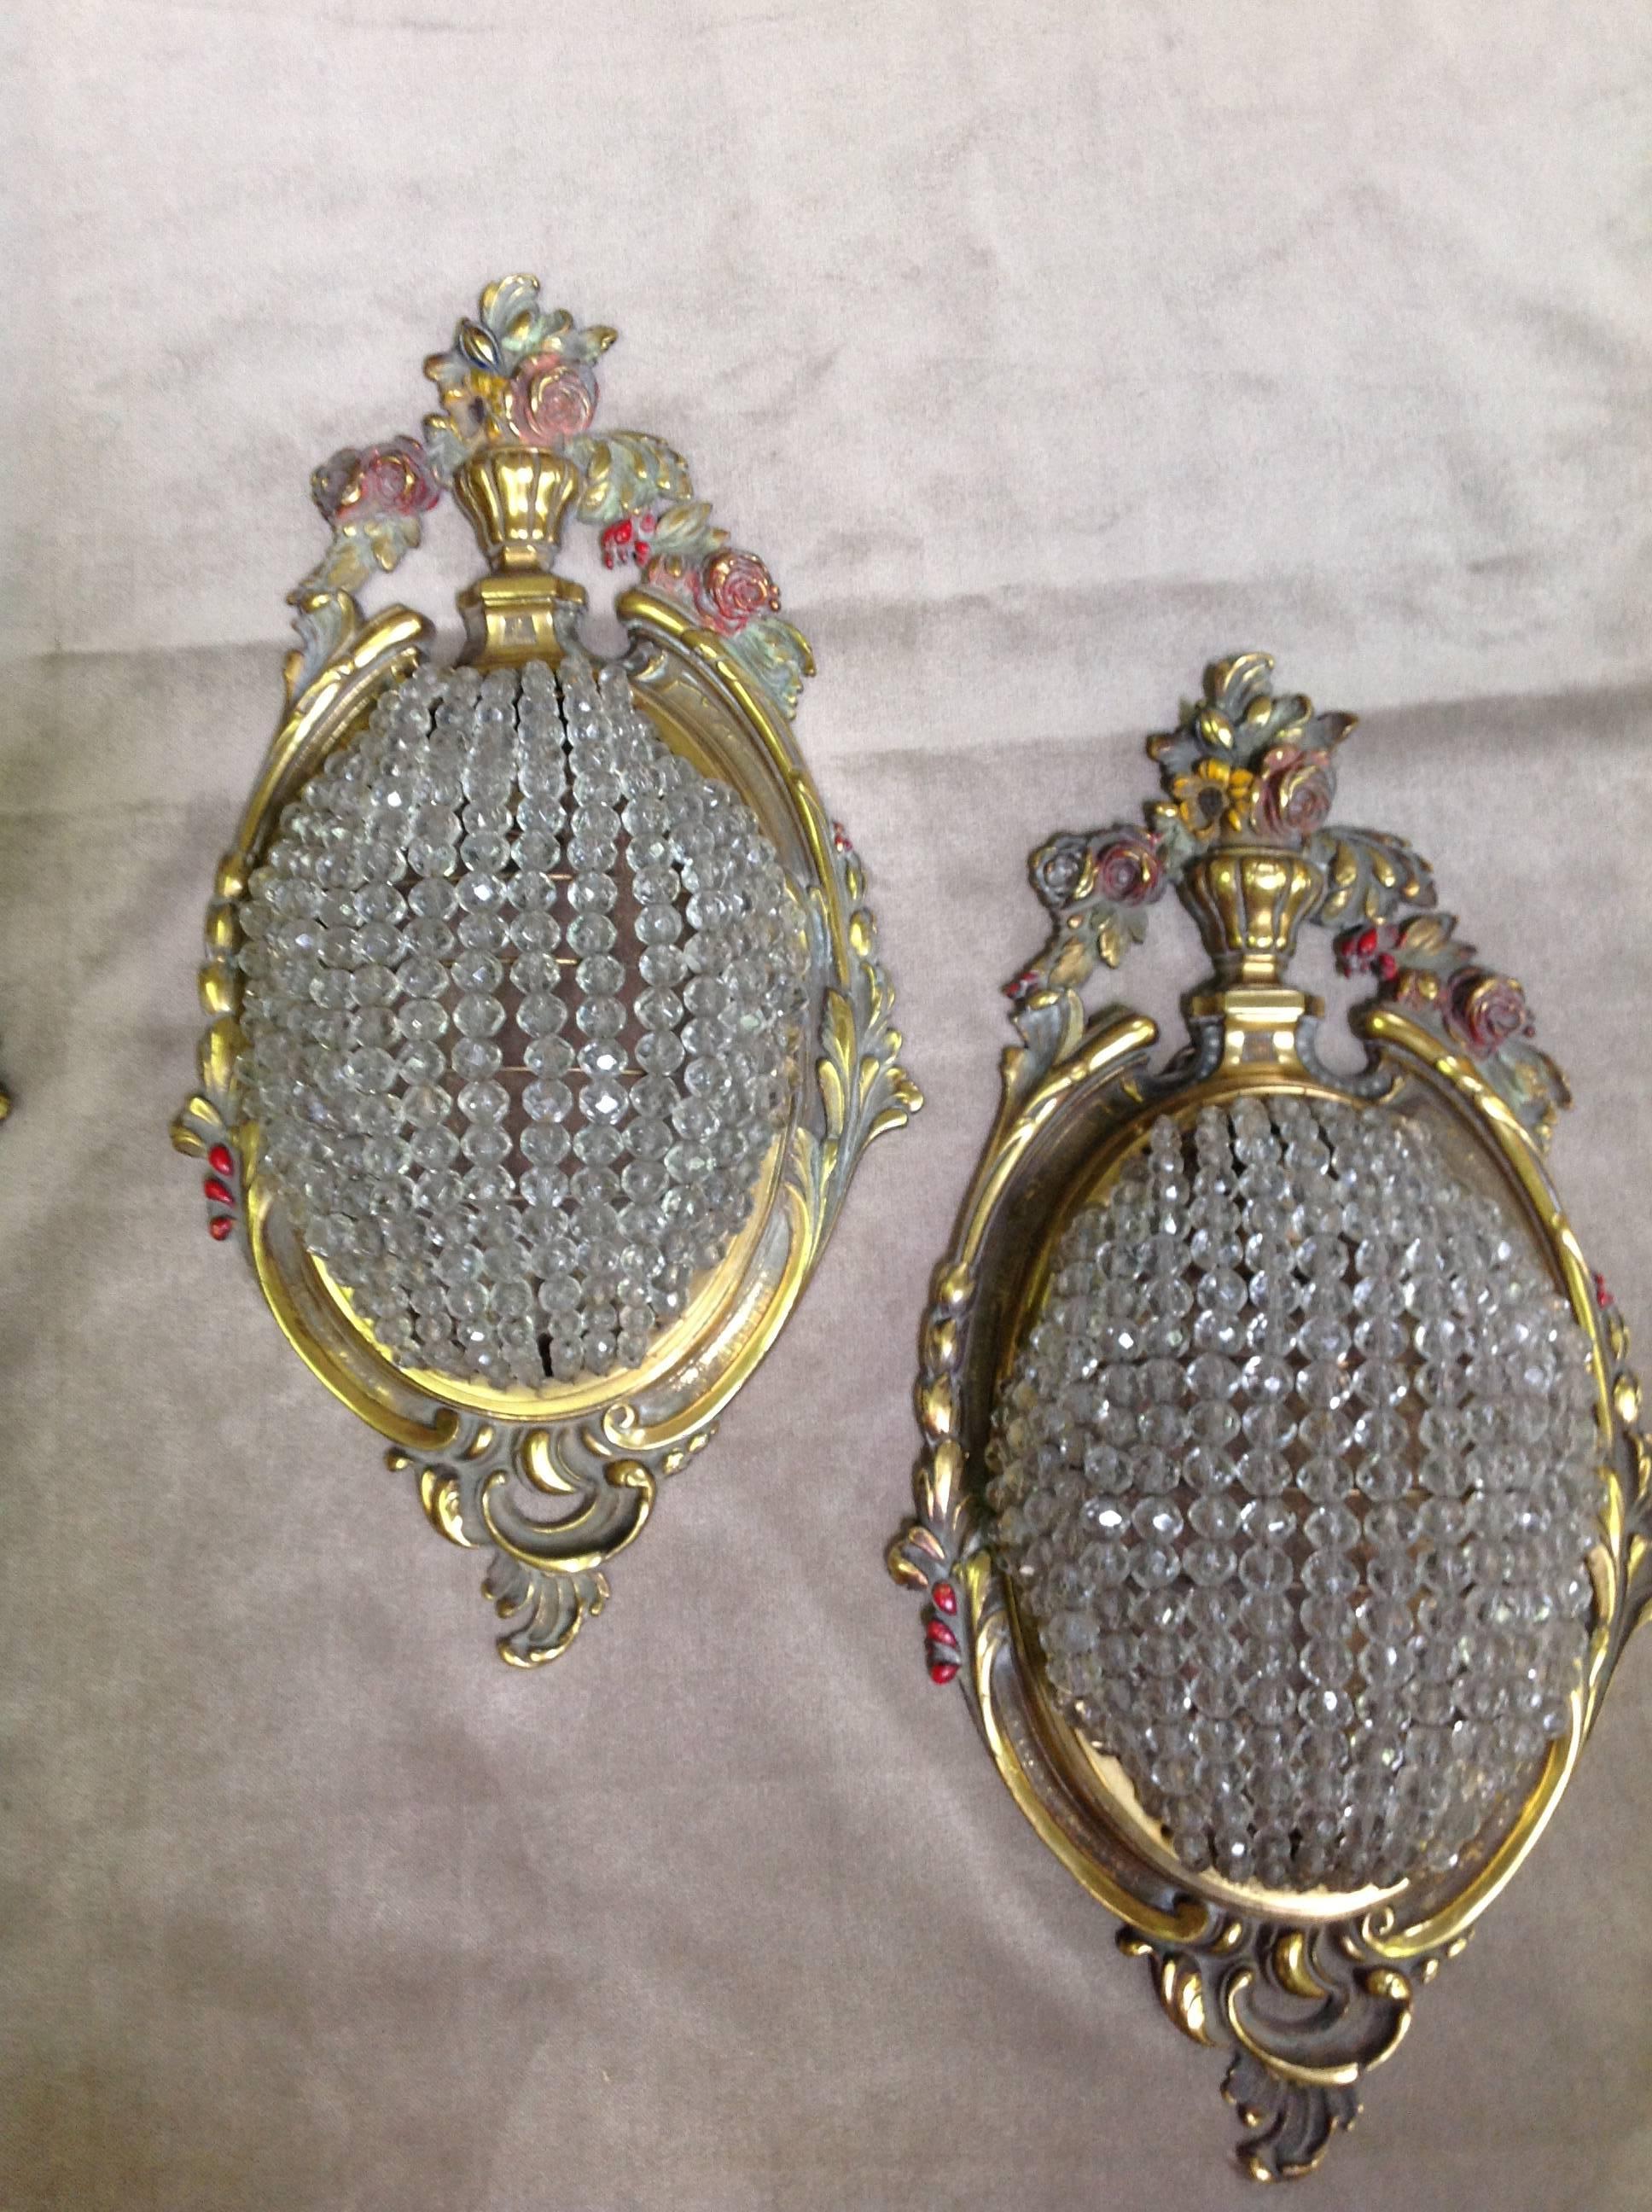 These four French sconces from the 1920s are exquisite. Recommend professional rewiring.